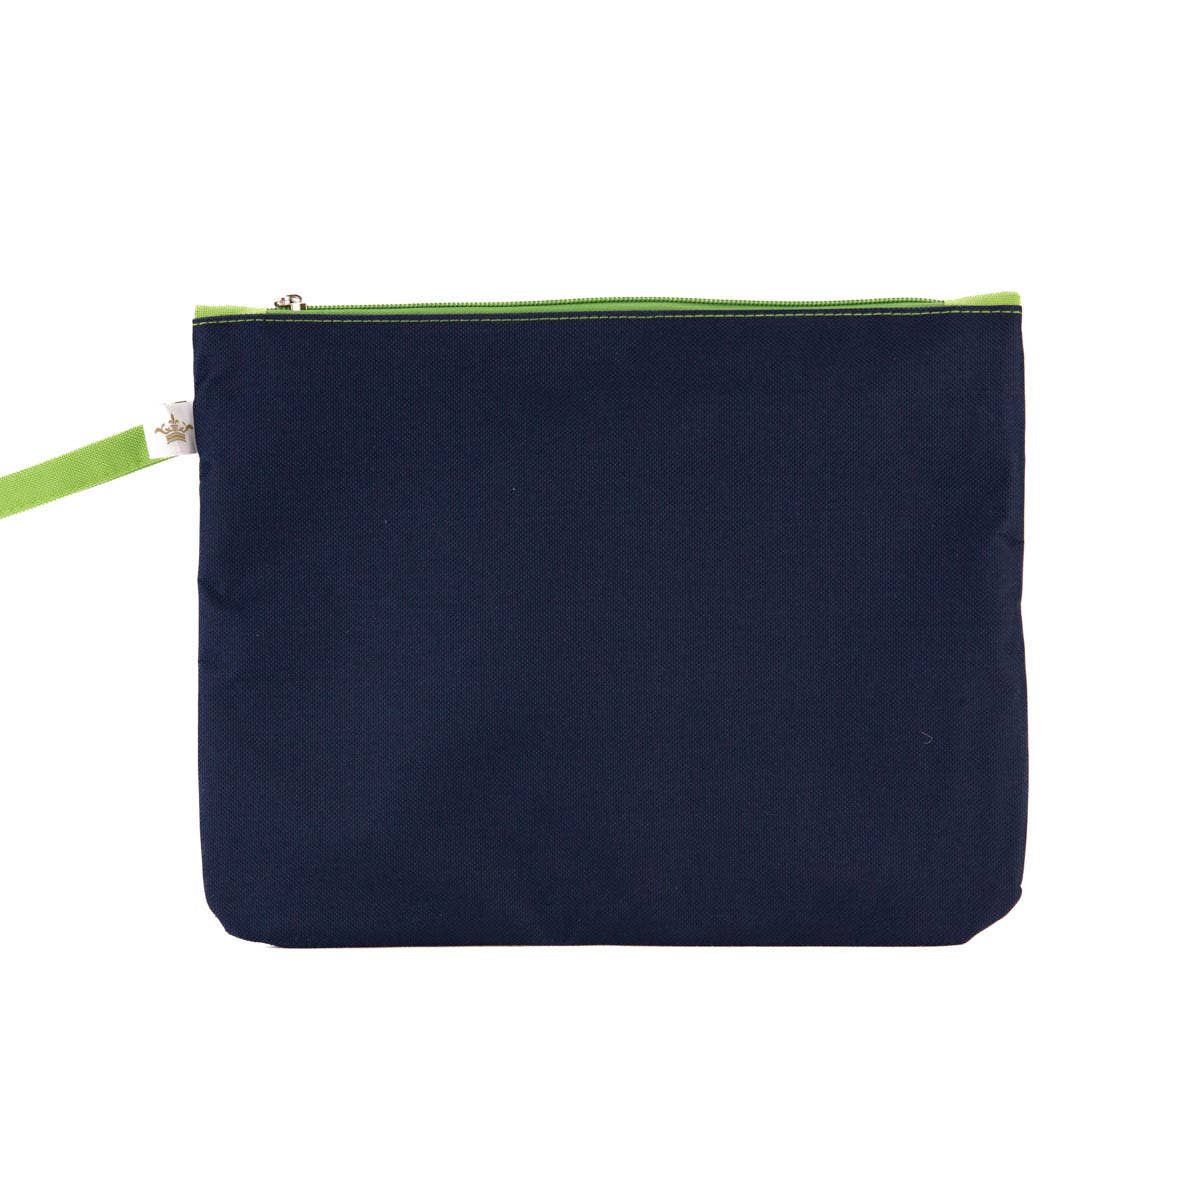 Wet/Dry Bag Navy/Lime by The Royal Standard